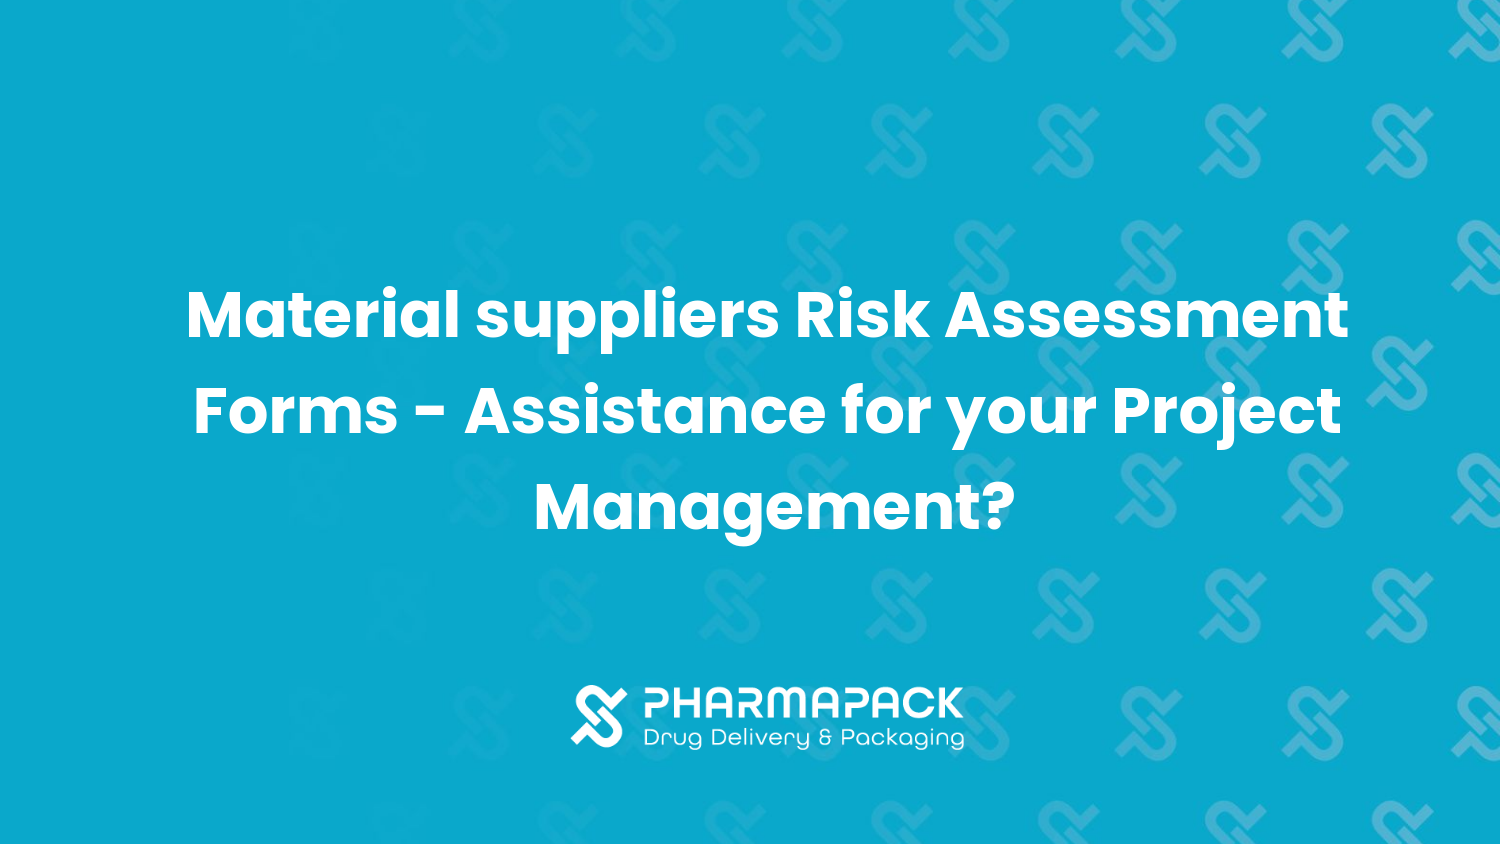 Material Suppliers Risk Assessment Forms - Assistance for your Project Management?